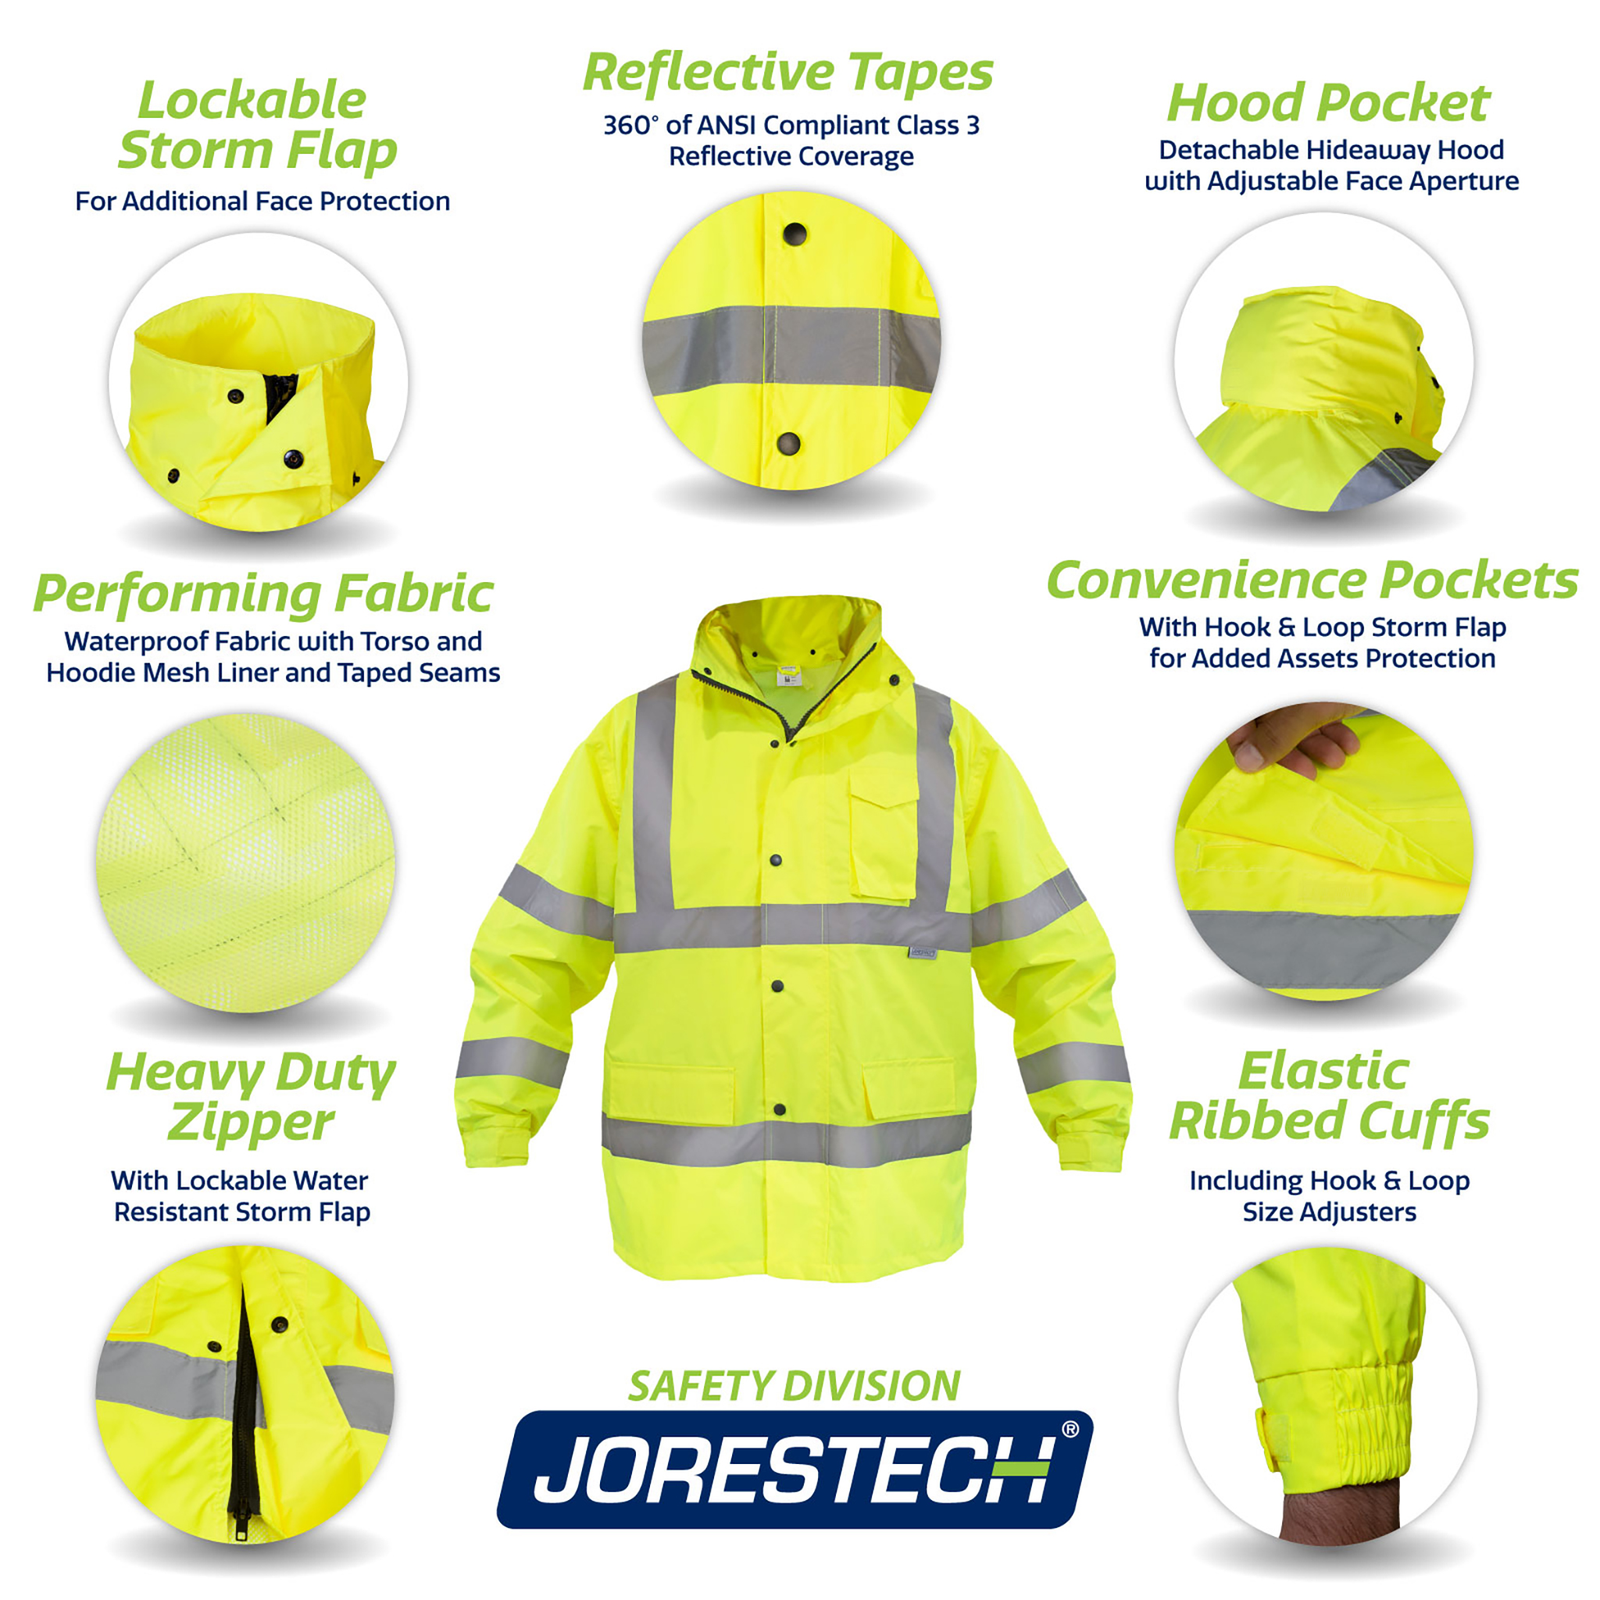 Yellow/lime reflective rain jacket and call outs that read: Lockable storm flap for face protection. Reflective tapes ANSI compliant class 3 type R. Hood pocket detachable and hide away hood. Performing fabric, waterproof, mesh liner and taped seams. Multiple convenience pockets. Heavy duty zipper with additional storm flap. Elastic ribbed cuffs with hook and loop strap.